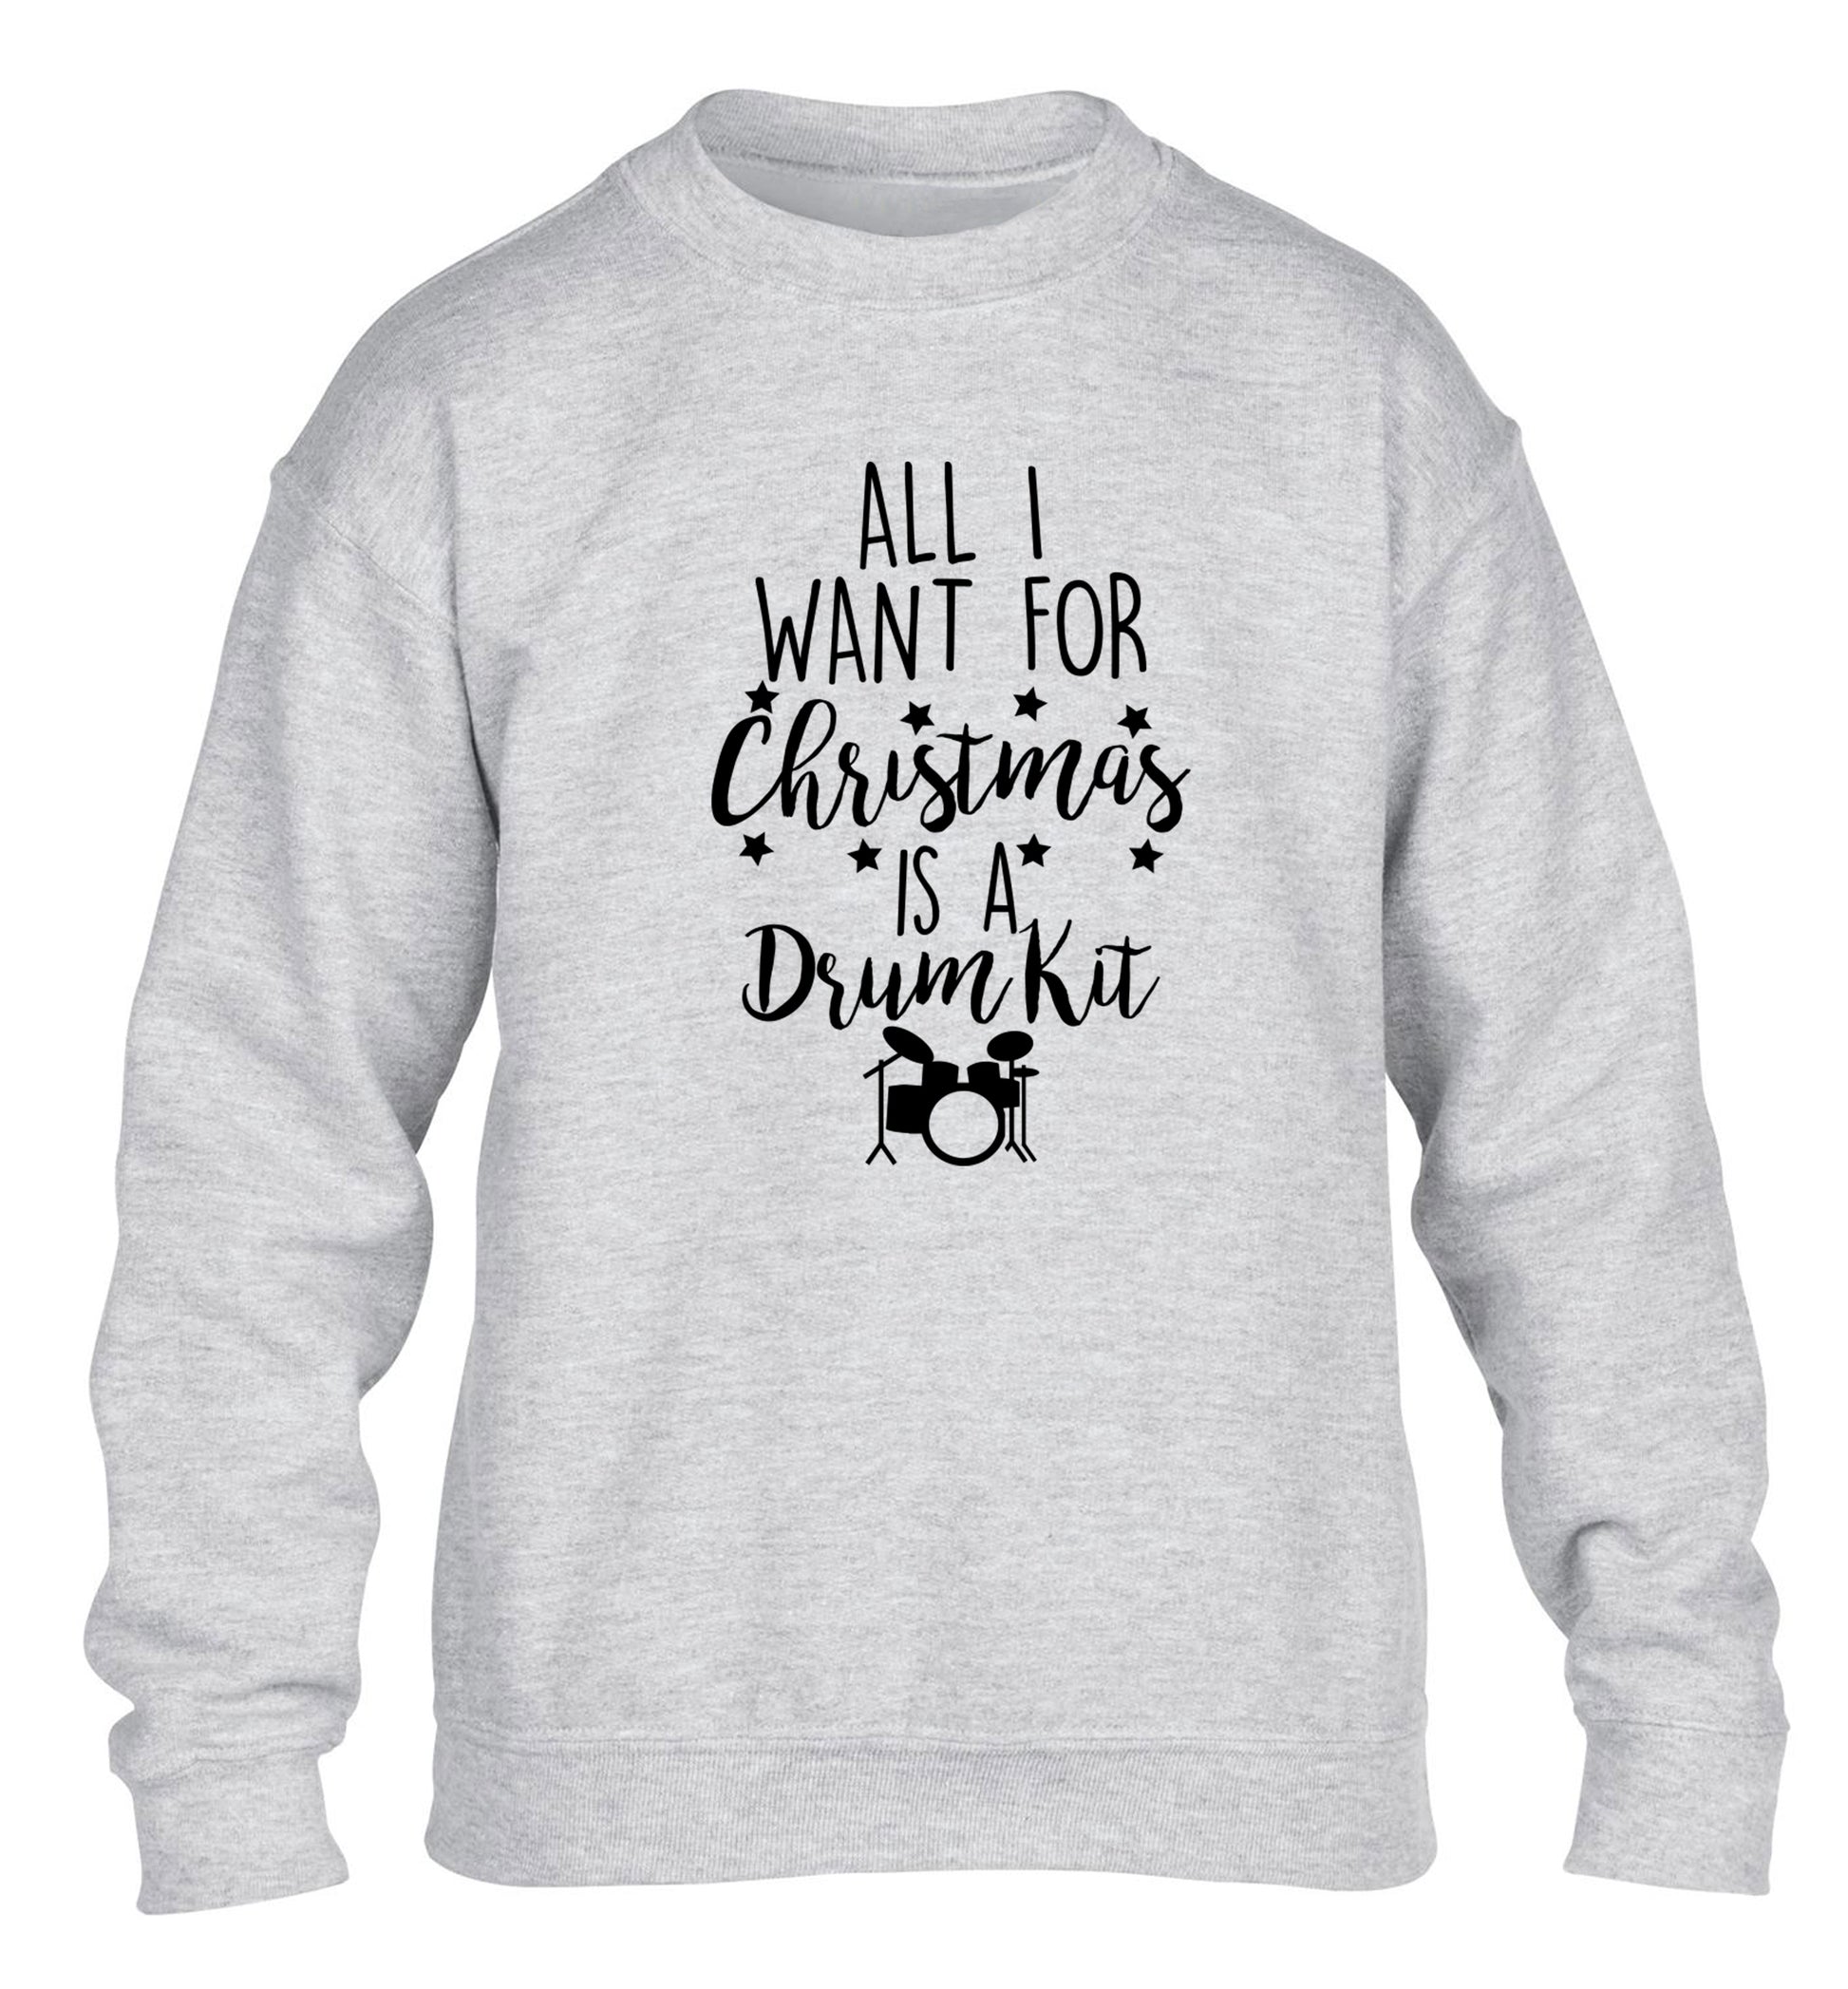 All I want for Christmas is a drum kit! children's grey sweater 12-14 Years